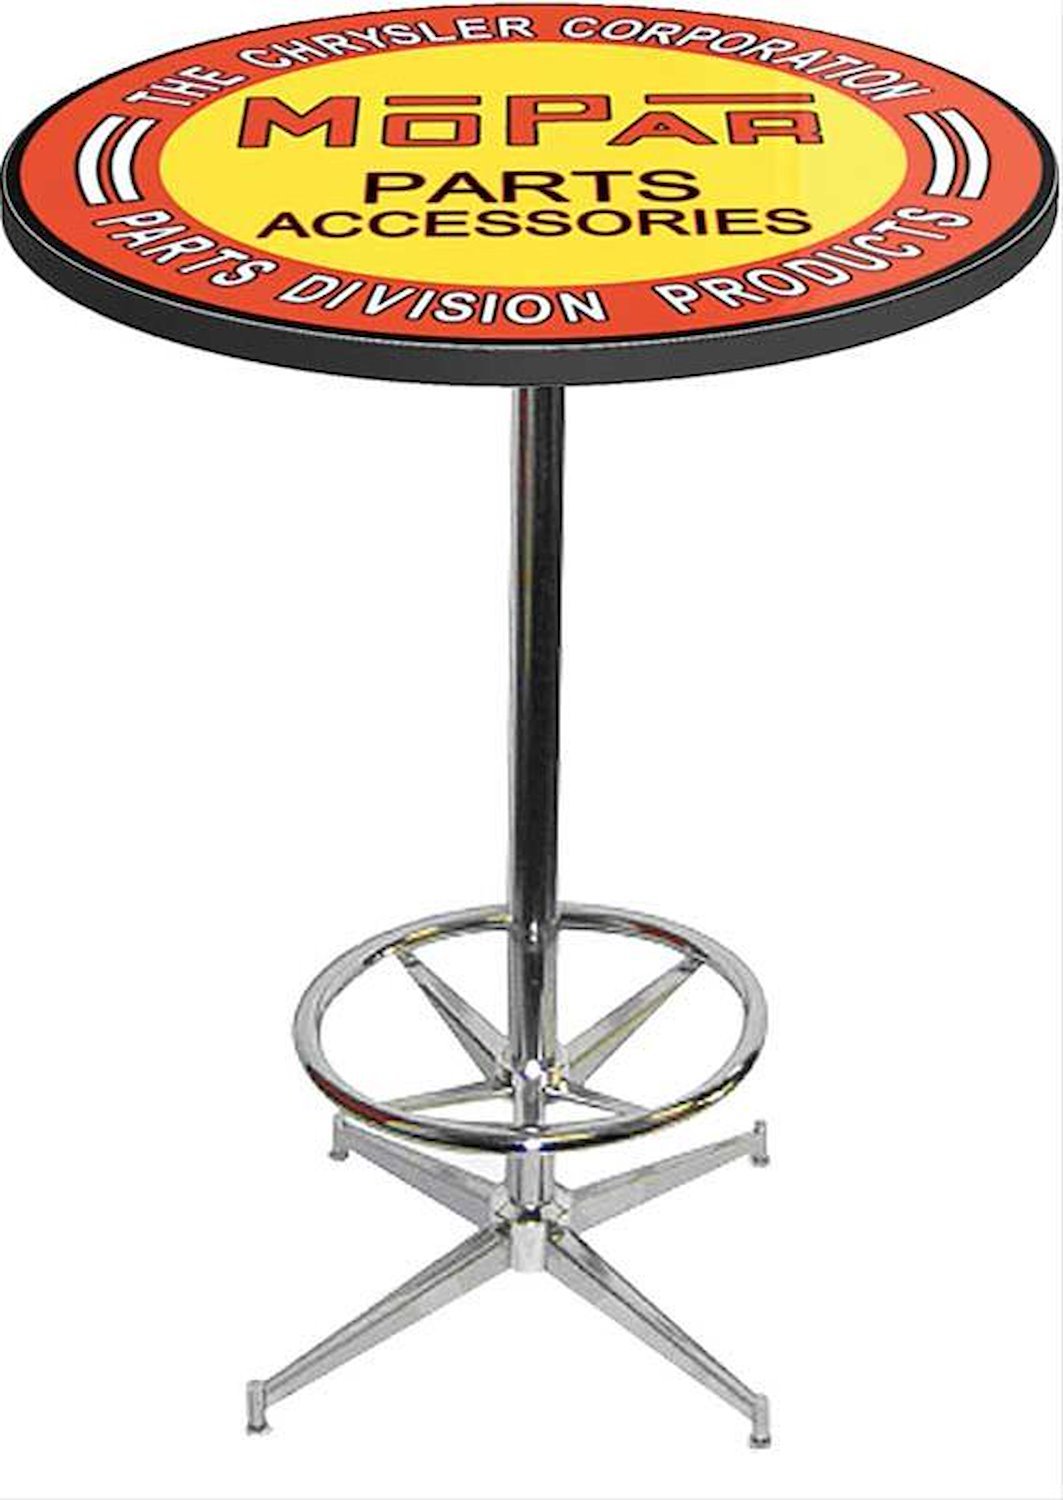 MD673106 Pub Table With Chrome Base And Foot Rest 1948-53 Orange/Yellow Mopar parts And Accessories Logo Pub Table With Chrome B